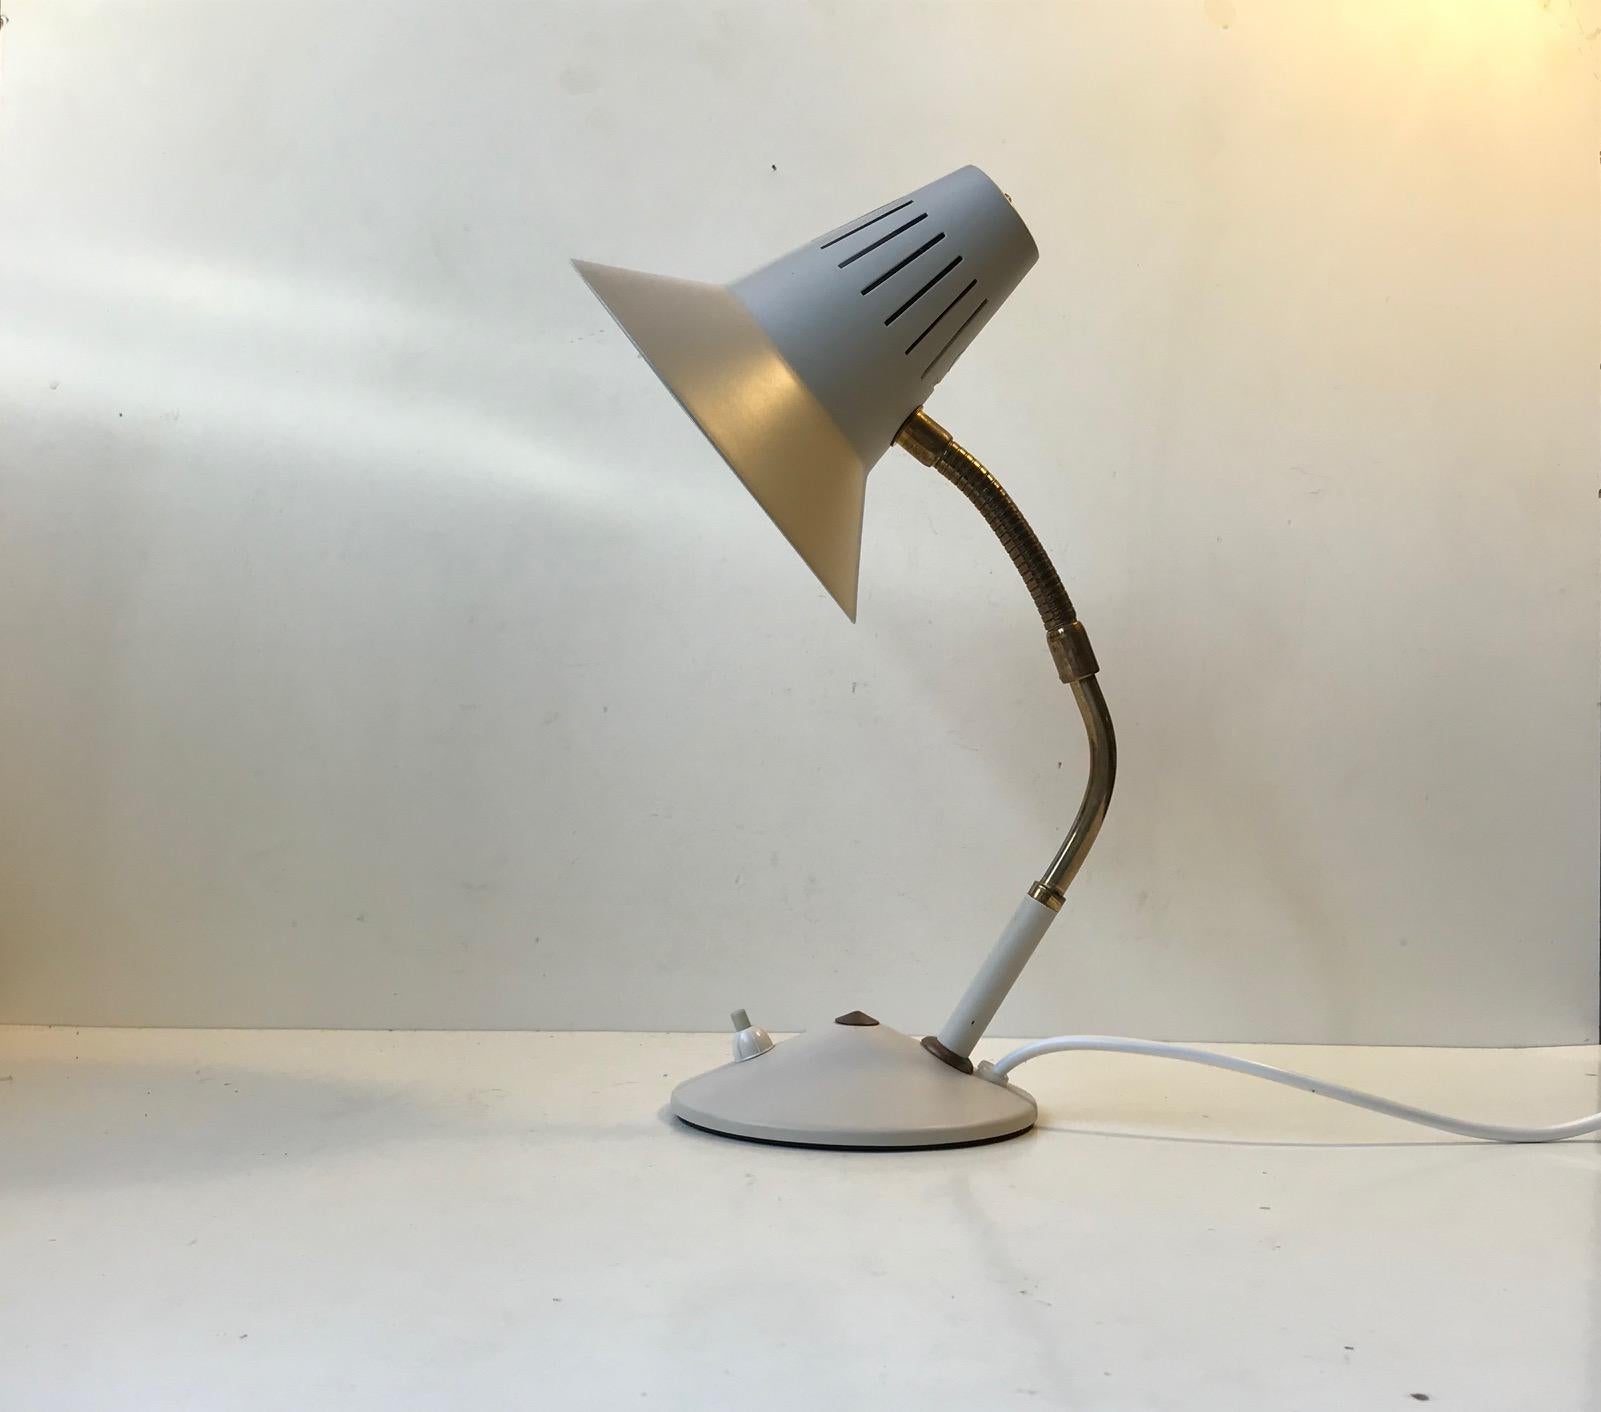 Small adjustable diablo style table light in the color light grey. Finish with brass flex-neck, stem, and detailing. Manufactured and designed by Elektrik in Norway during the late 1950s. Similar in style to designs by Boris Lacroix, Biny and Adnet.